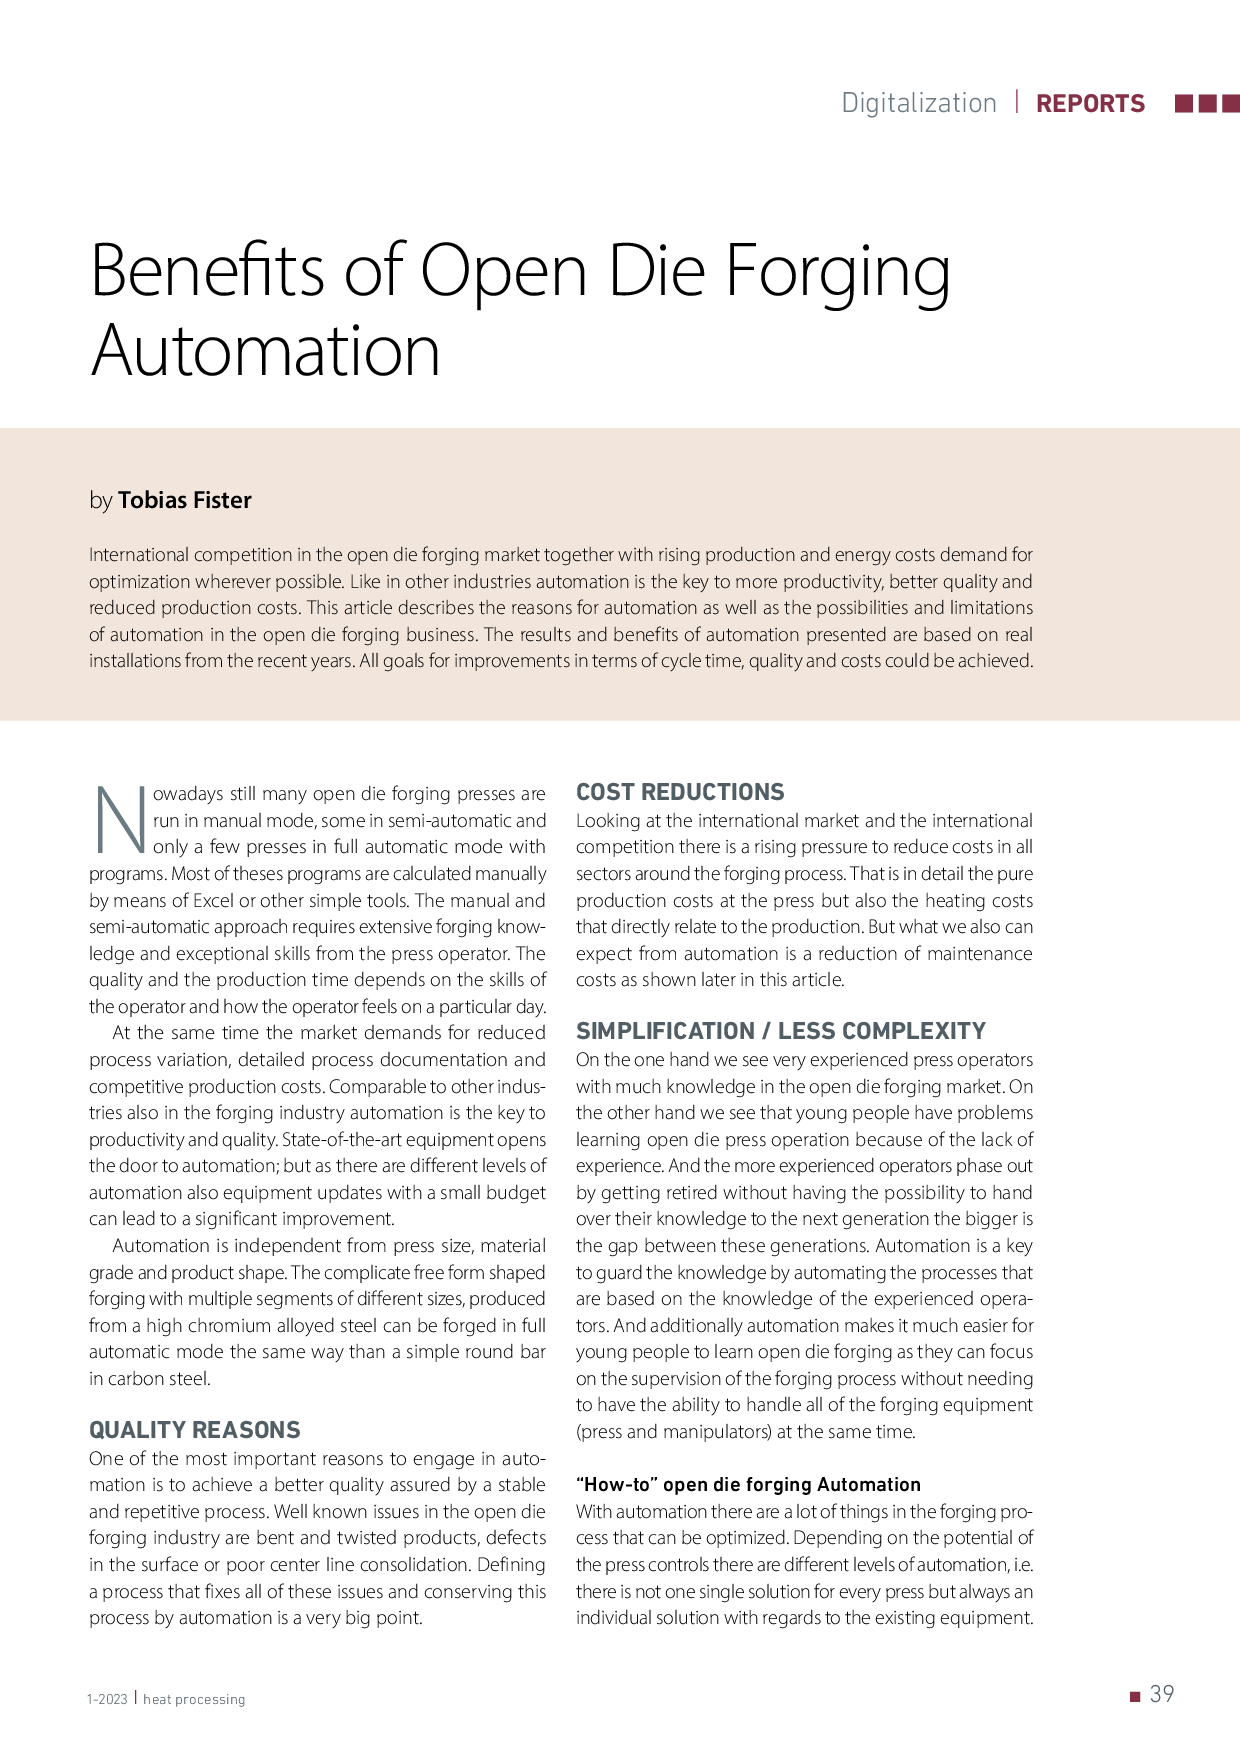 Benefits of Open Die Forging Automation